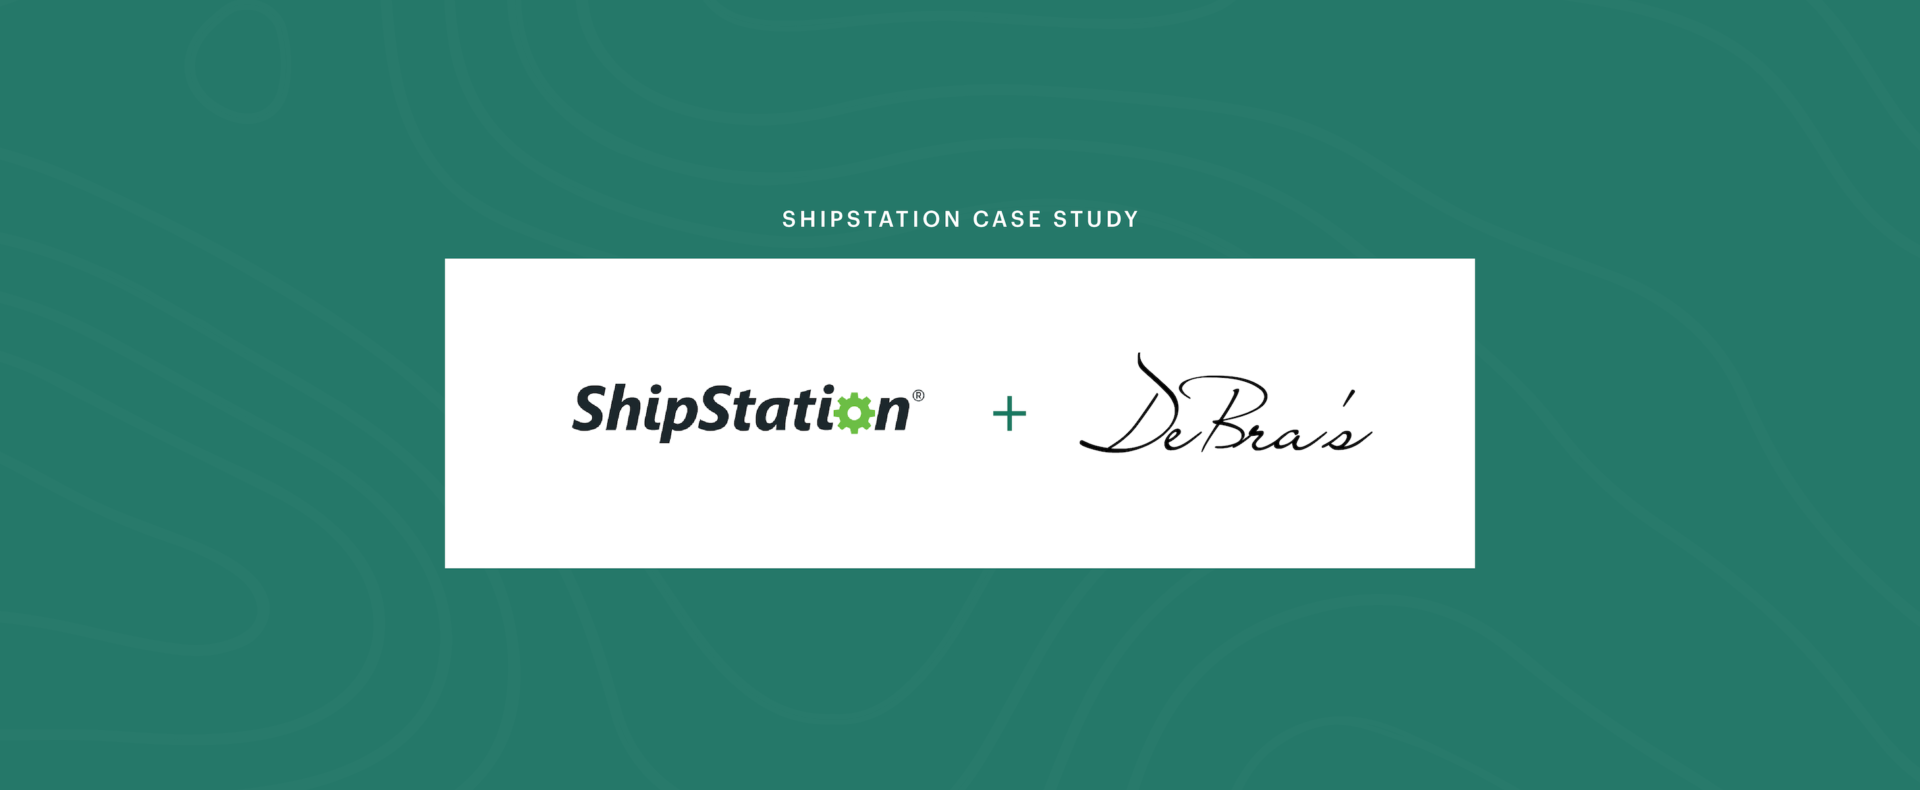 green background with ShipStation and DeBra's logos